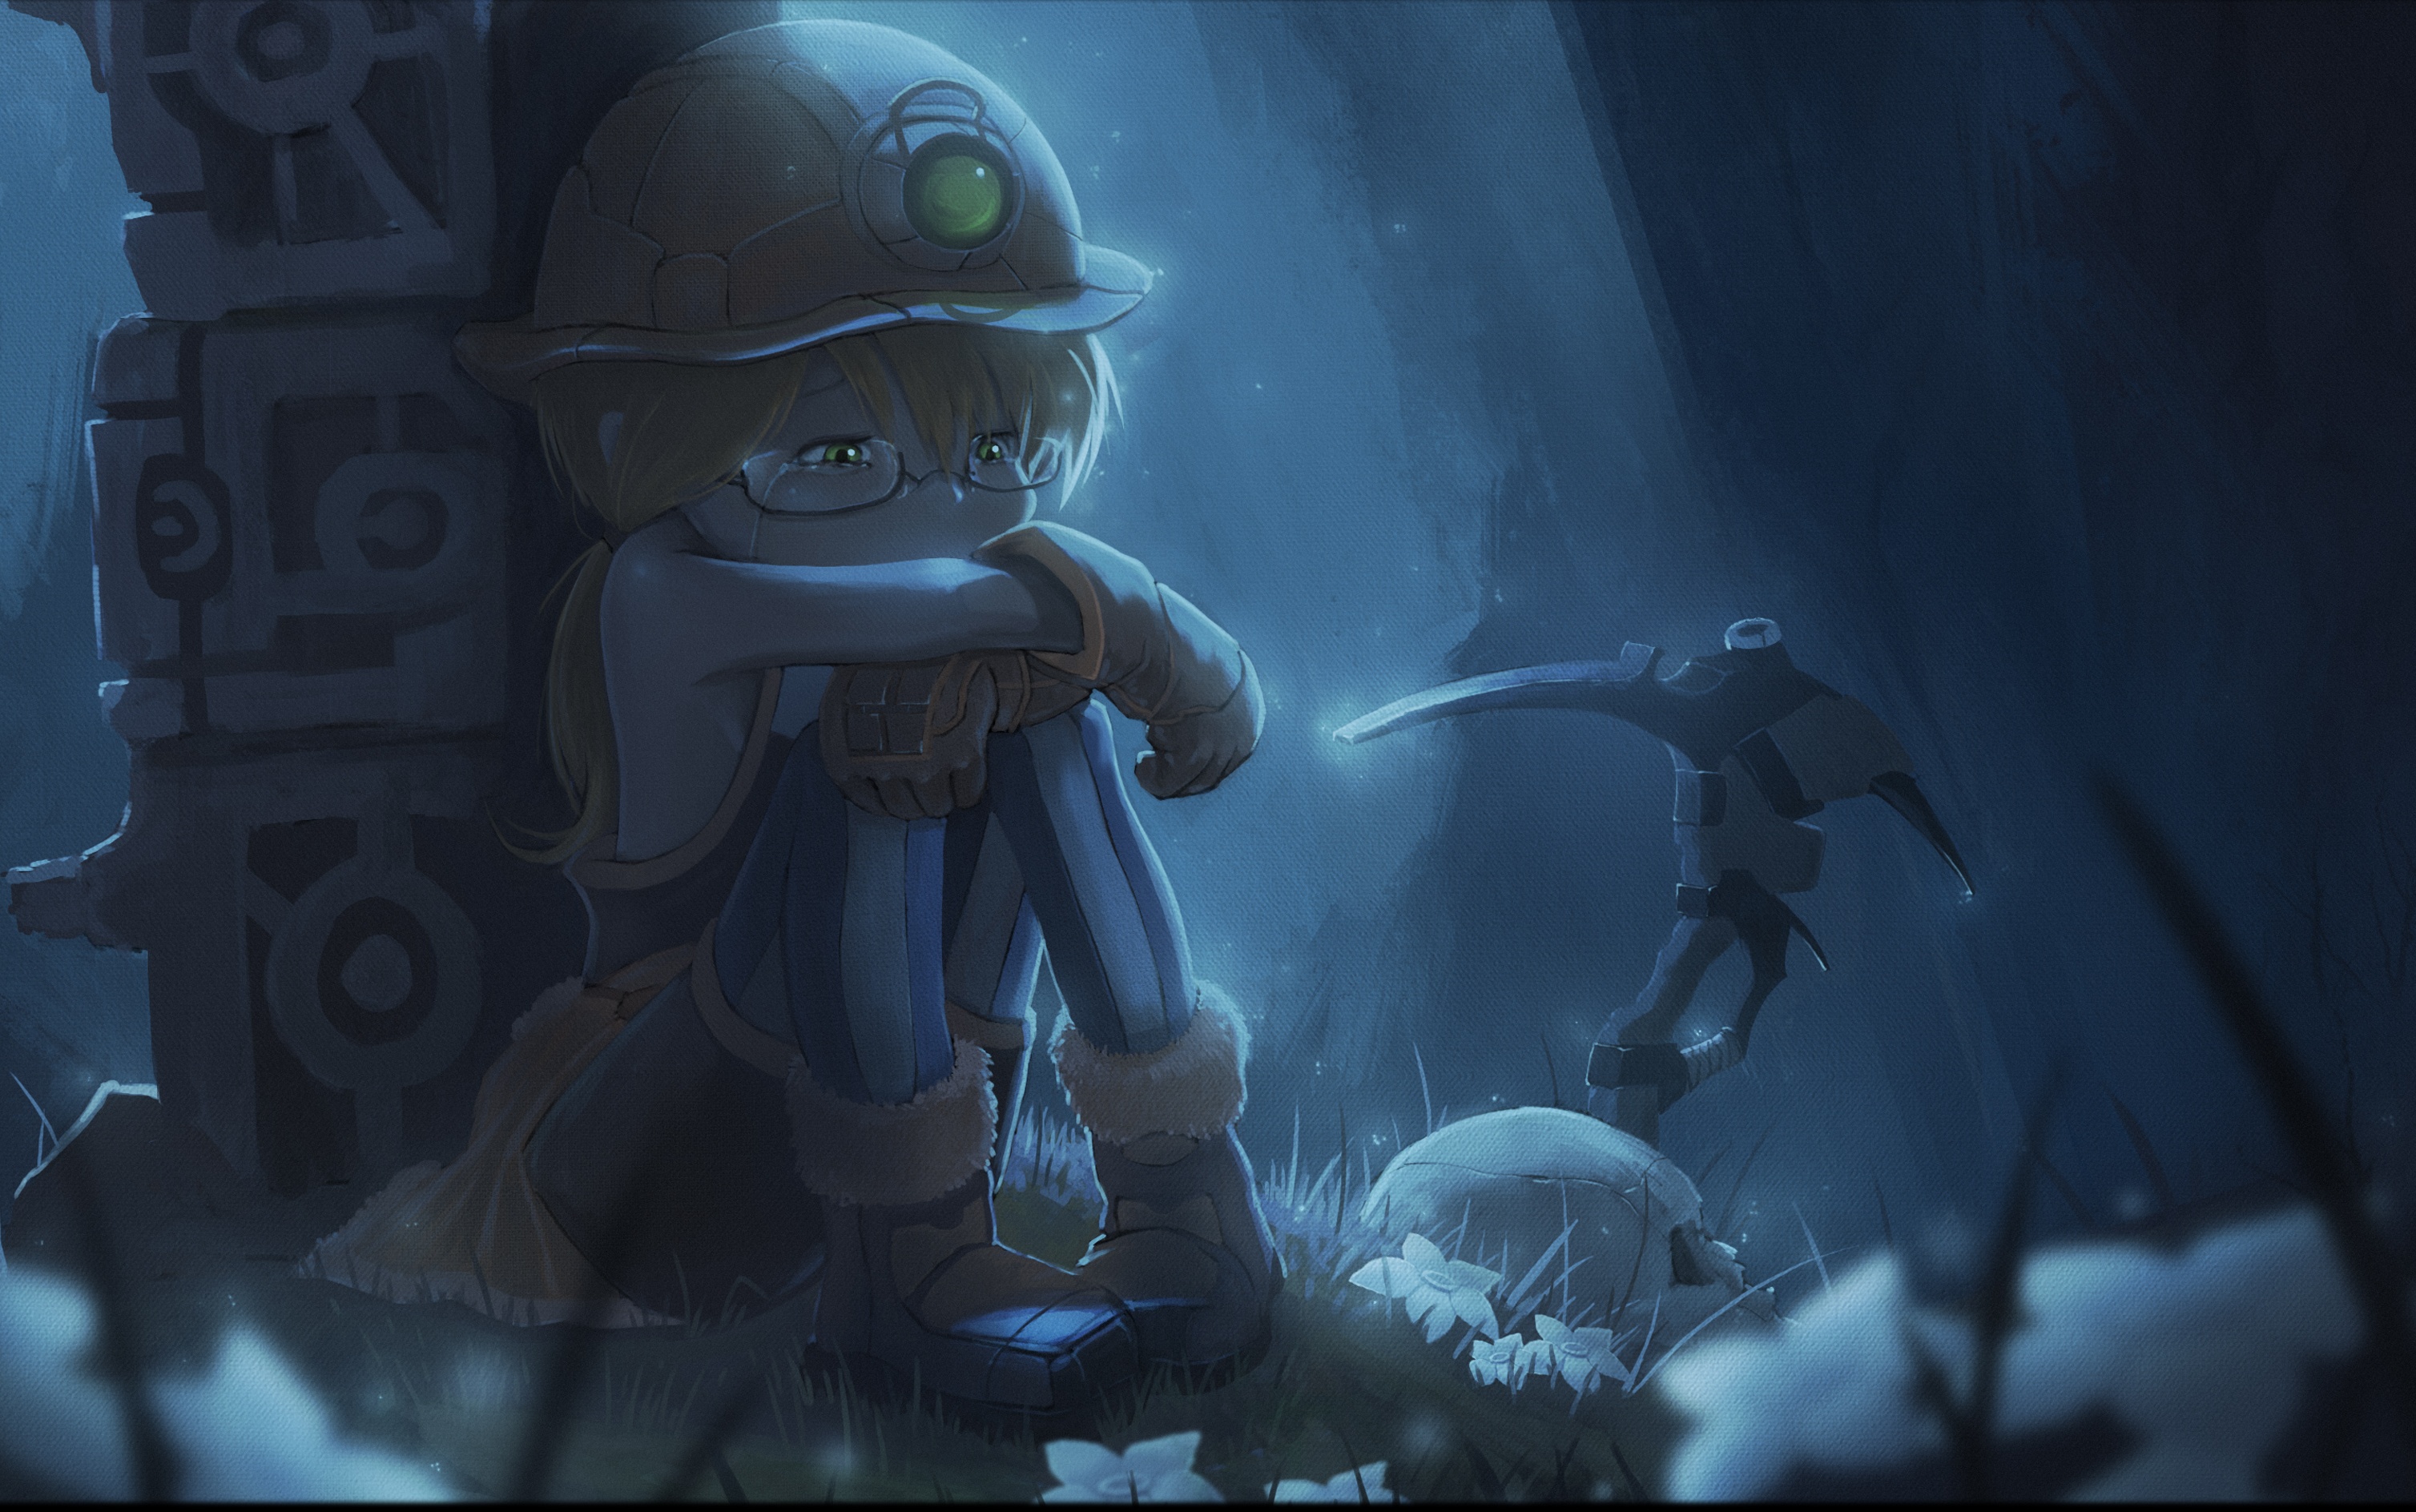 Riko Made In Abyss Made In Abyss Pickaxes Skull Flowers Blue 3016x1888